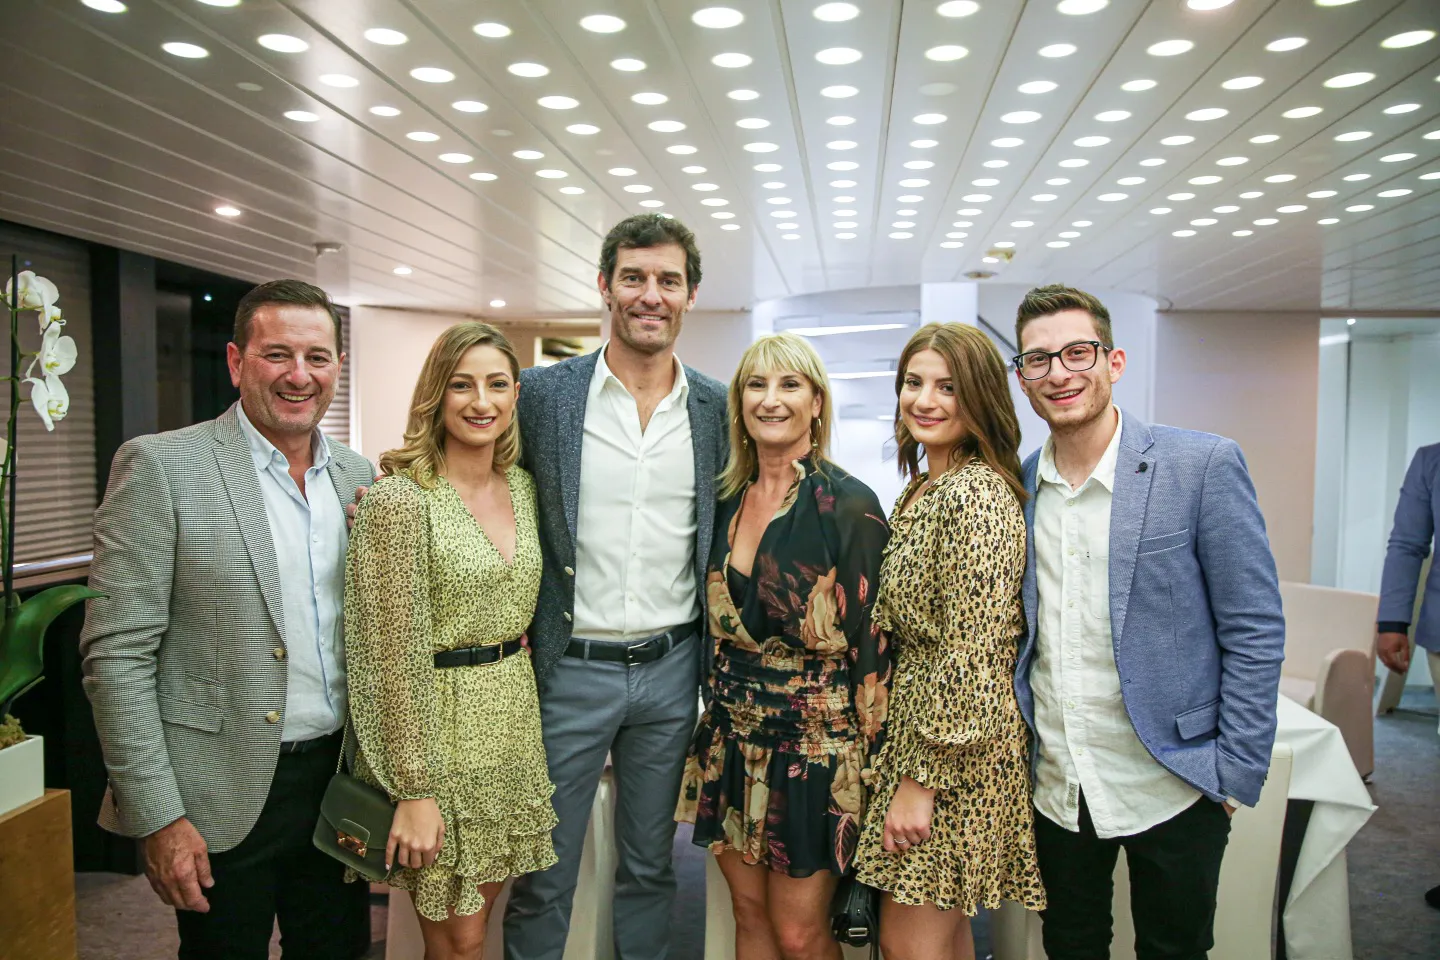 Guests on yacht with Mark Webber enjoying hospitality during F1 Monaco Grand Prix